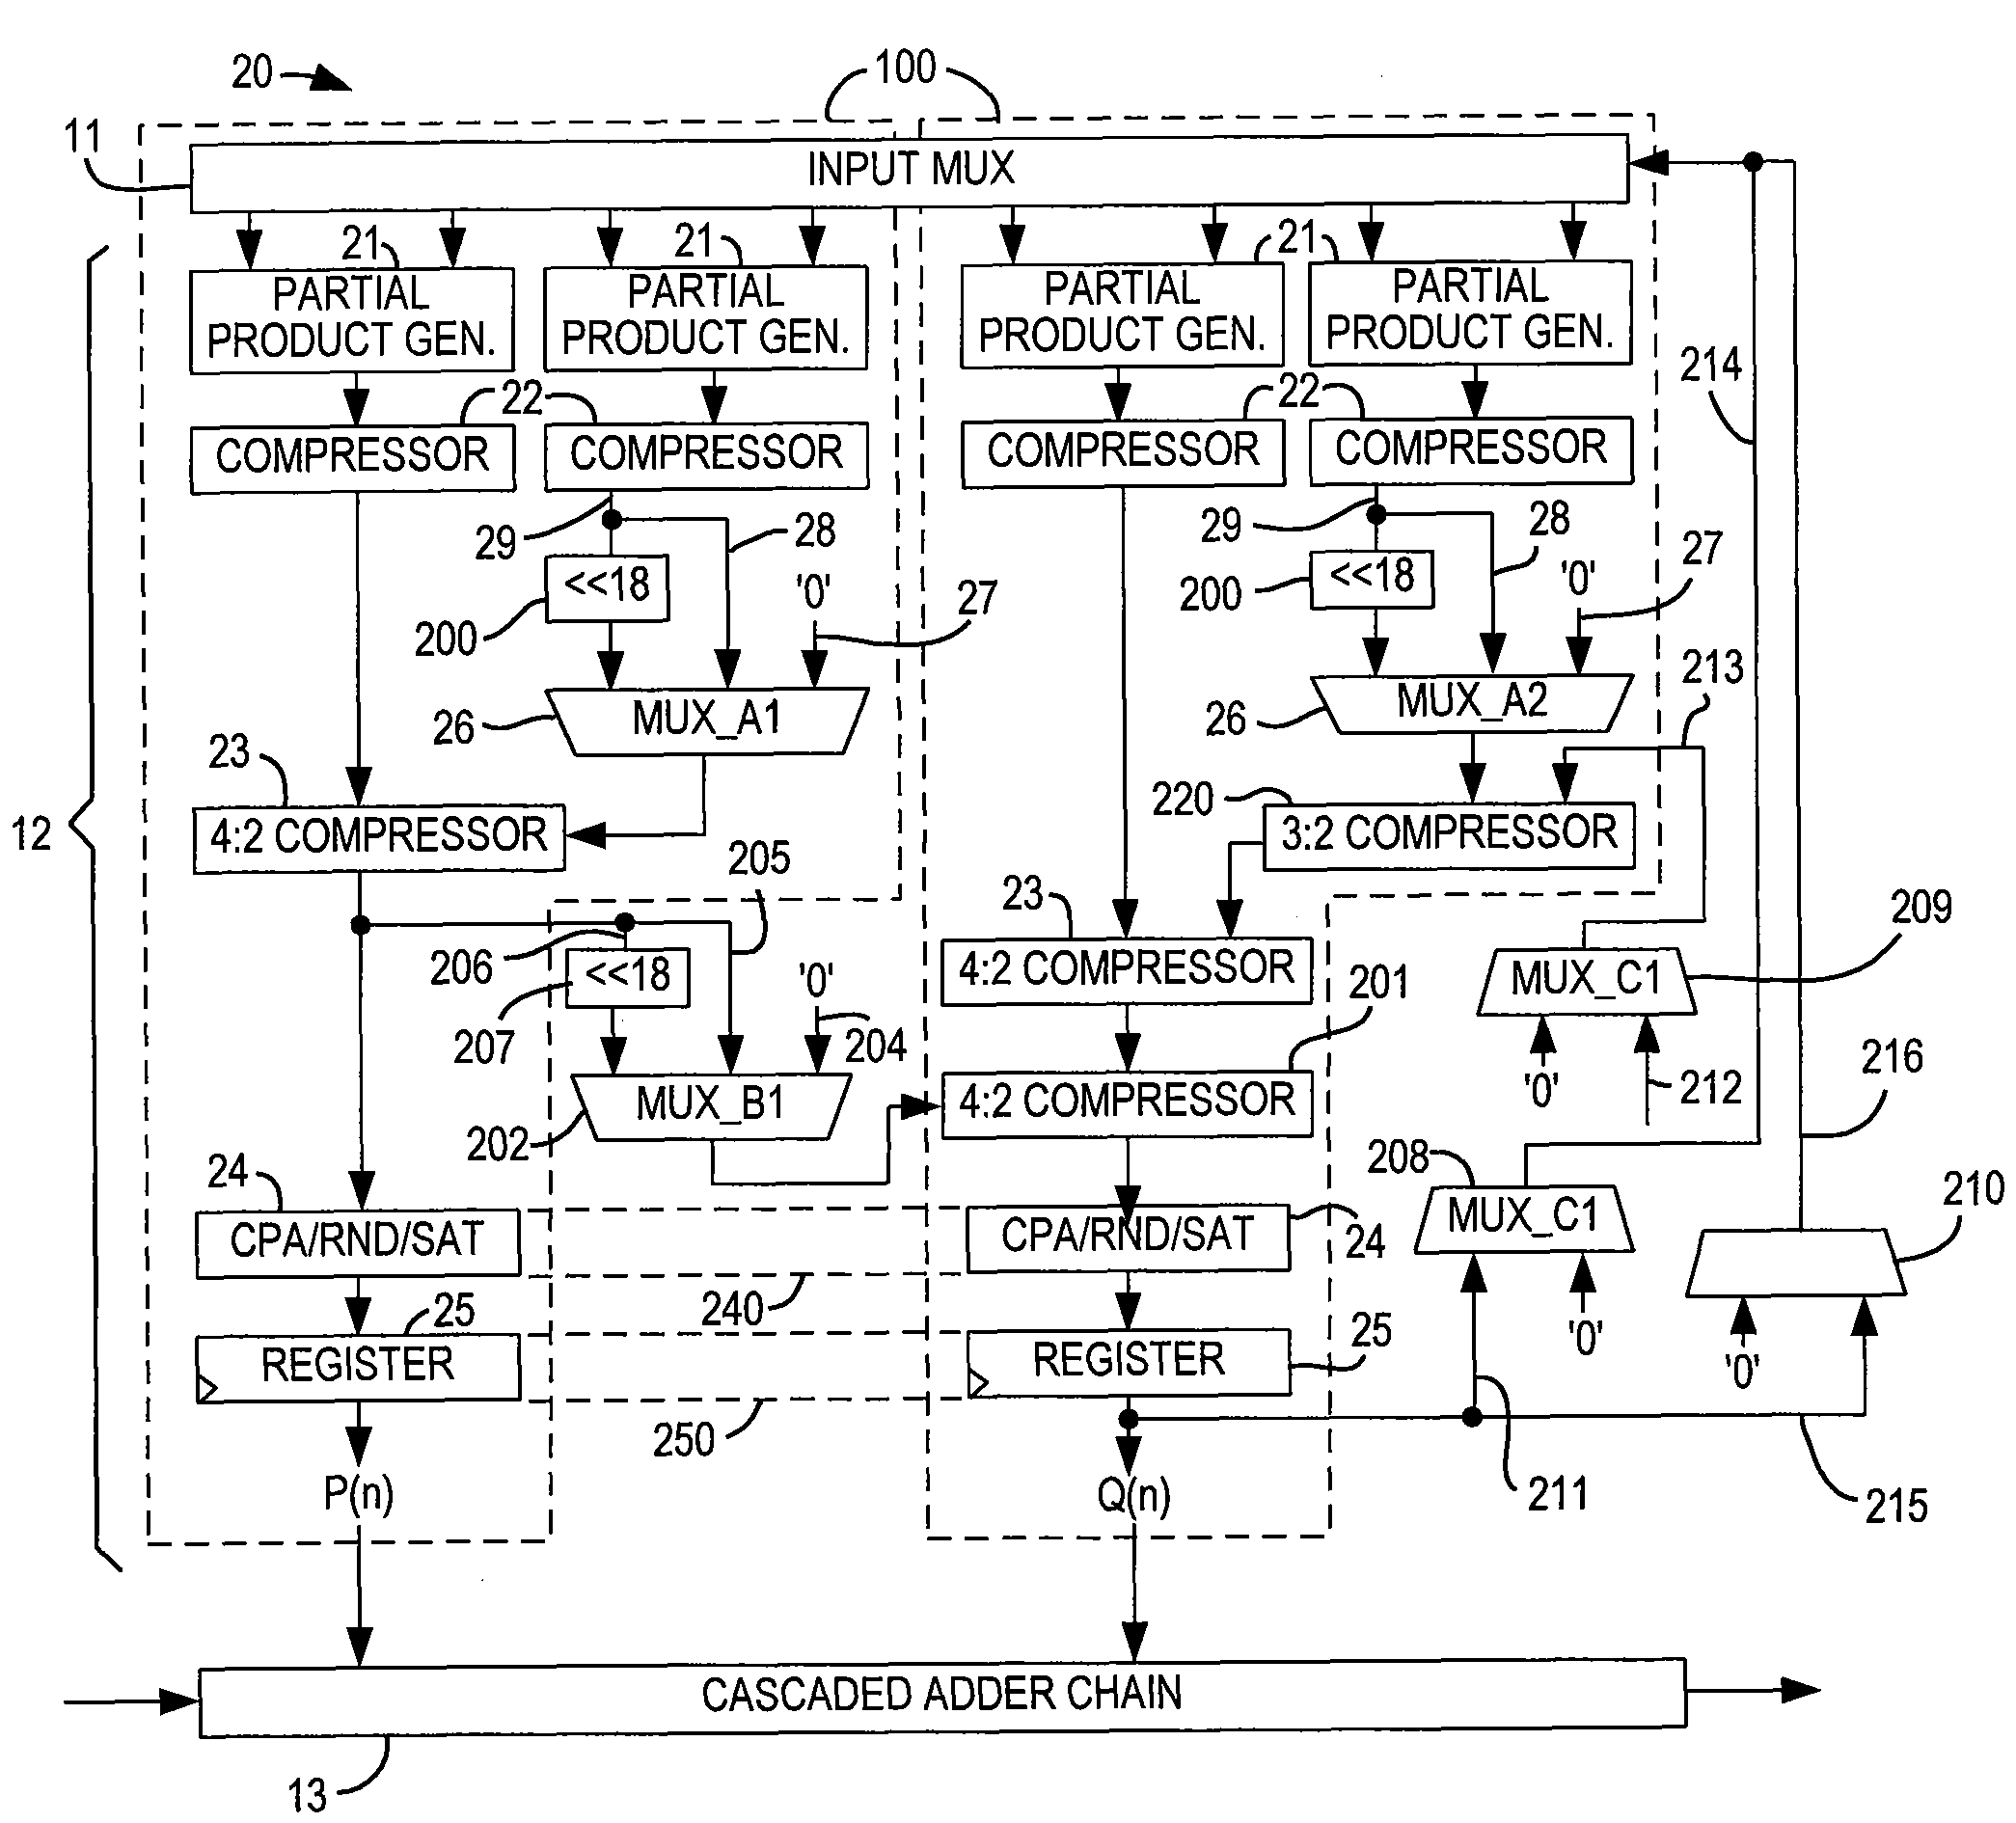 Specialized processing block for programmable logic device